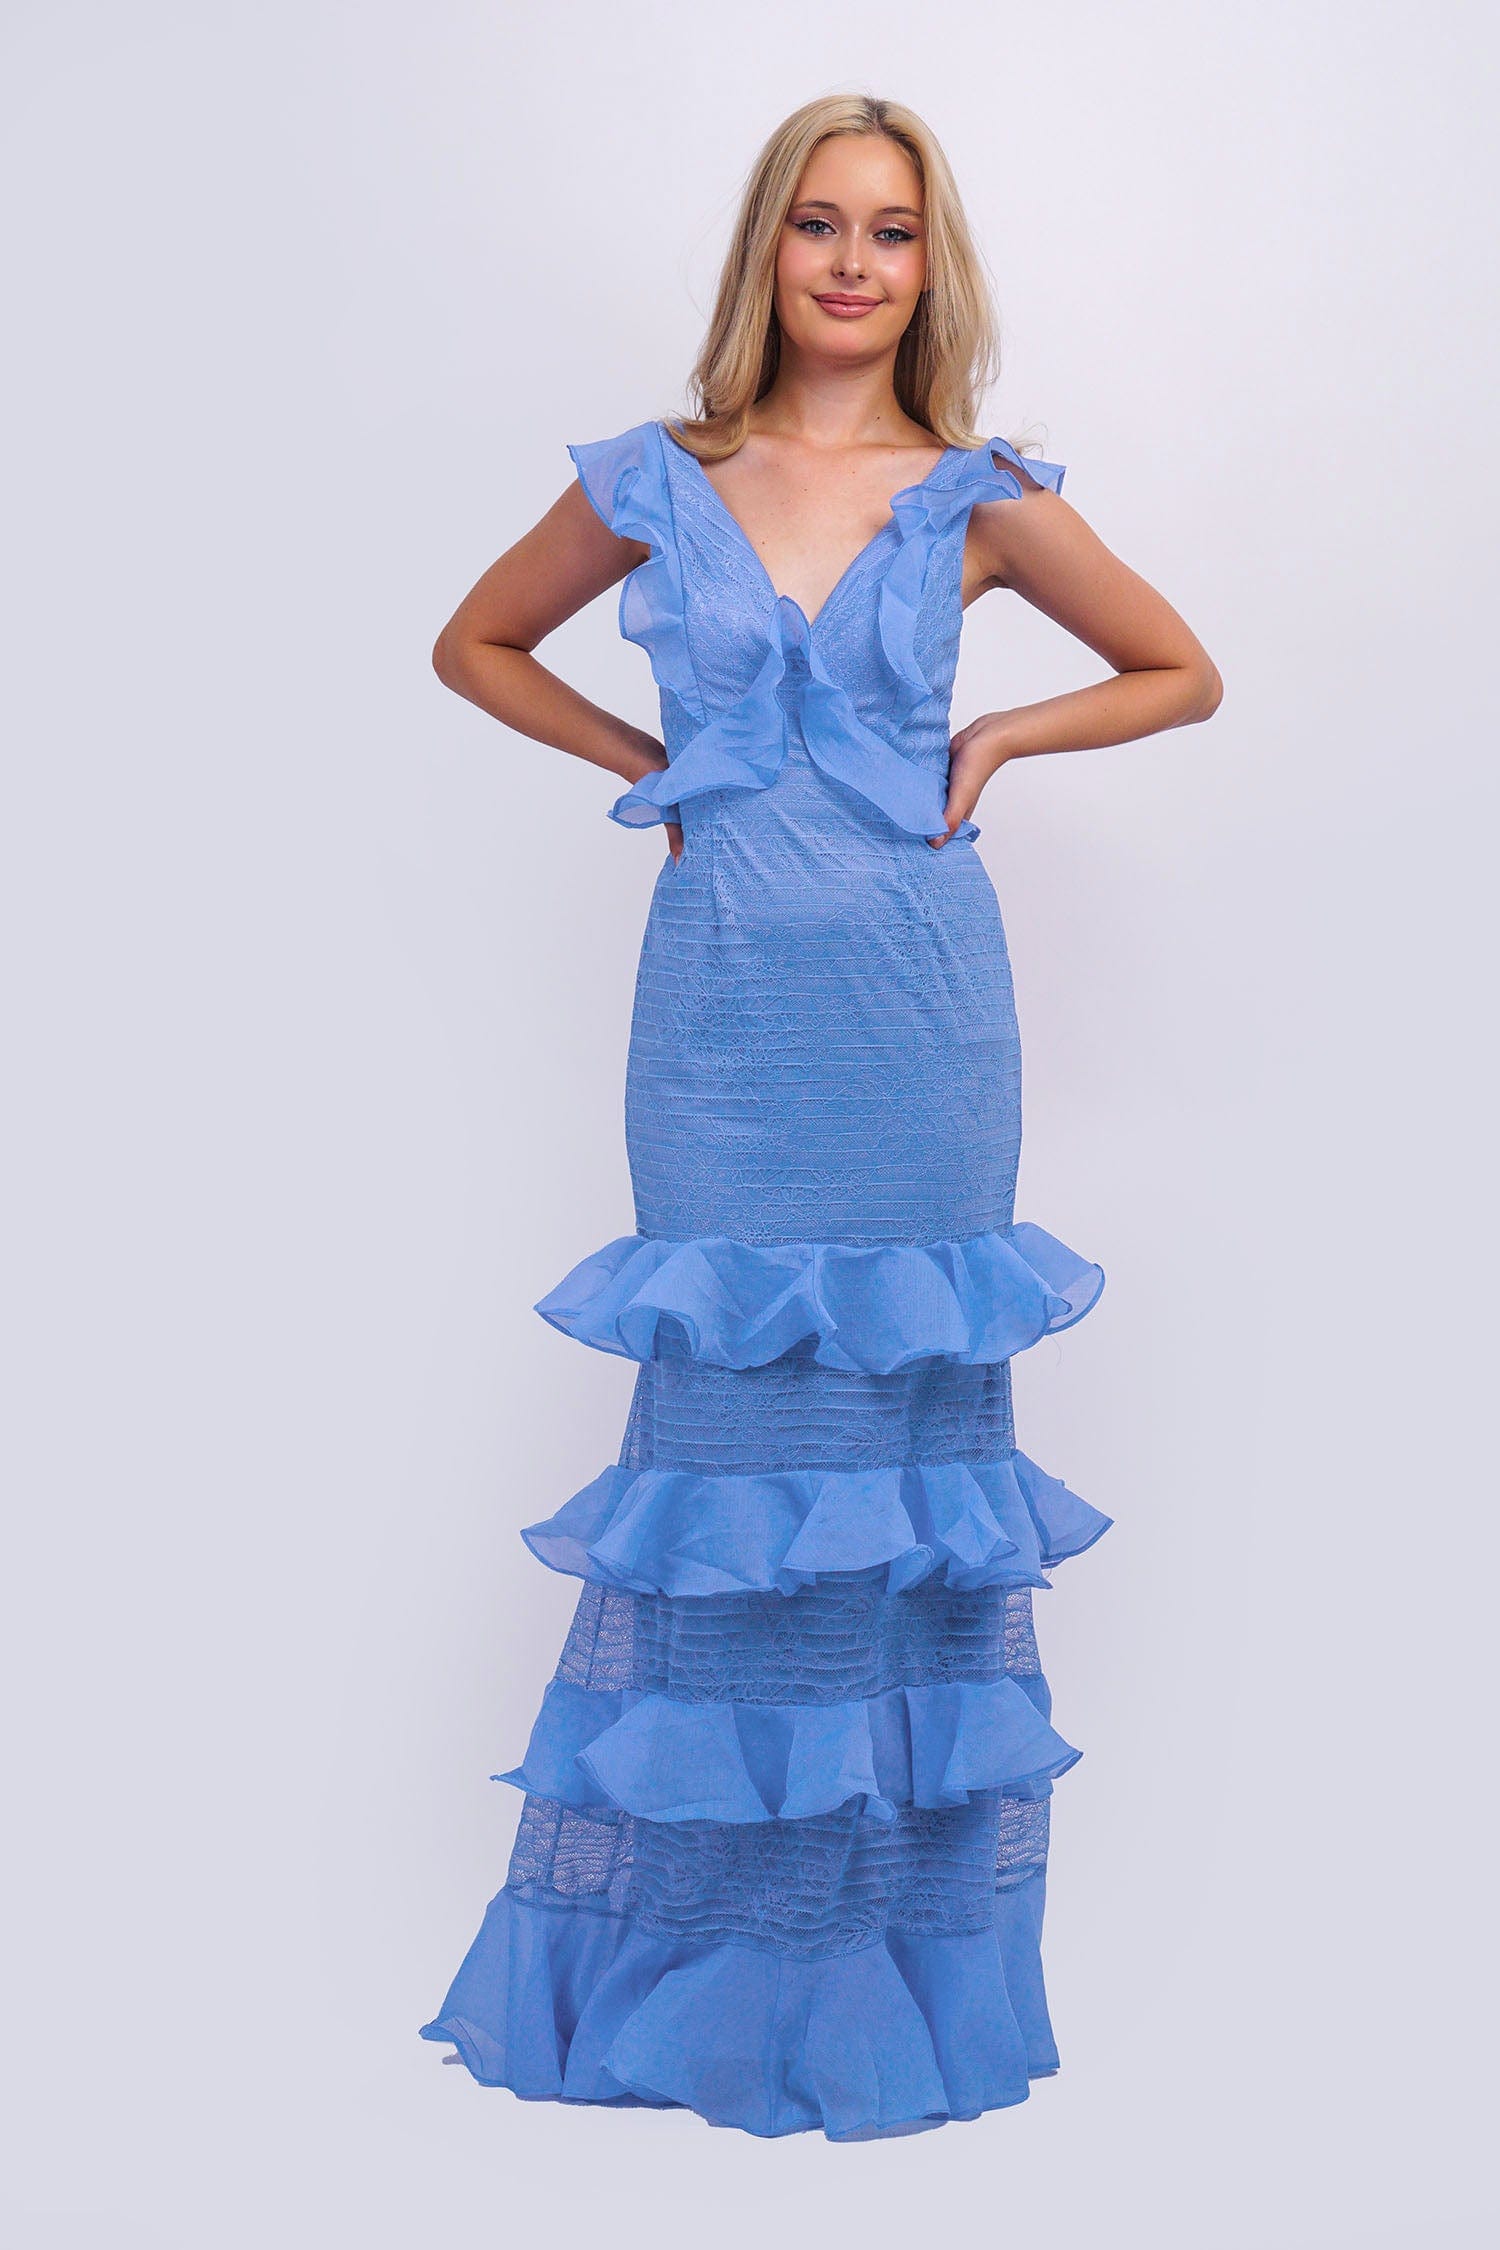 DCD GOWNS Periwinkle Ruffle Lace V Tier Gown